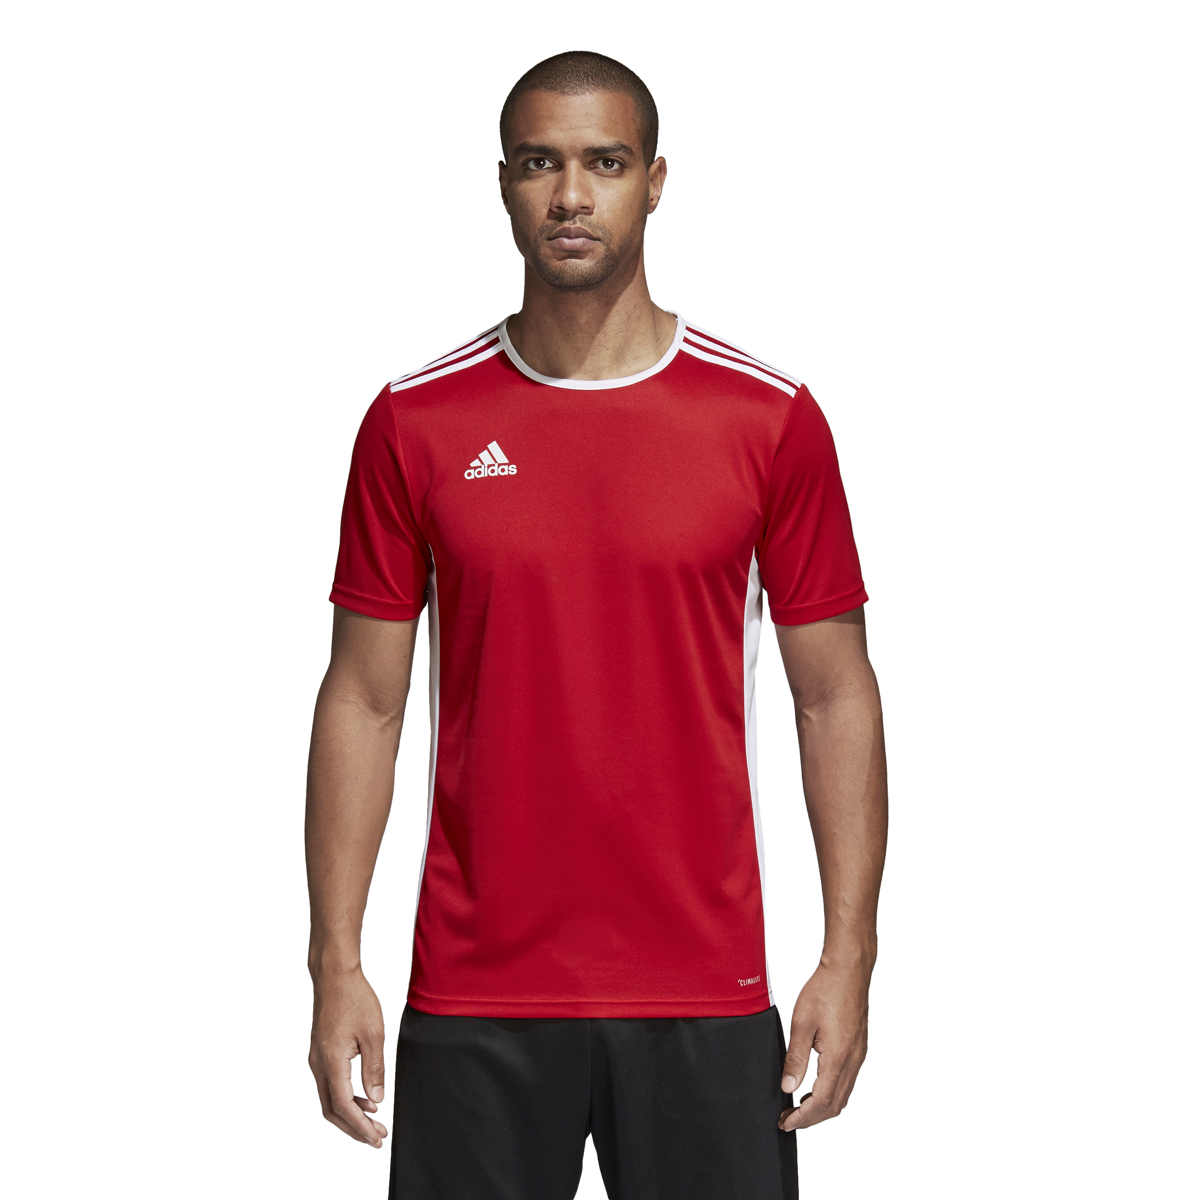 Men's Adidas Entrada 18 Soccer Jersey Red/White - XS - image 3 of 6